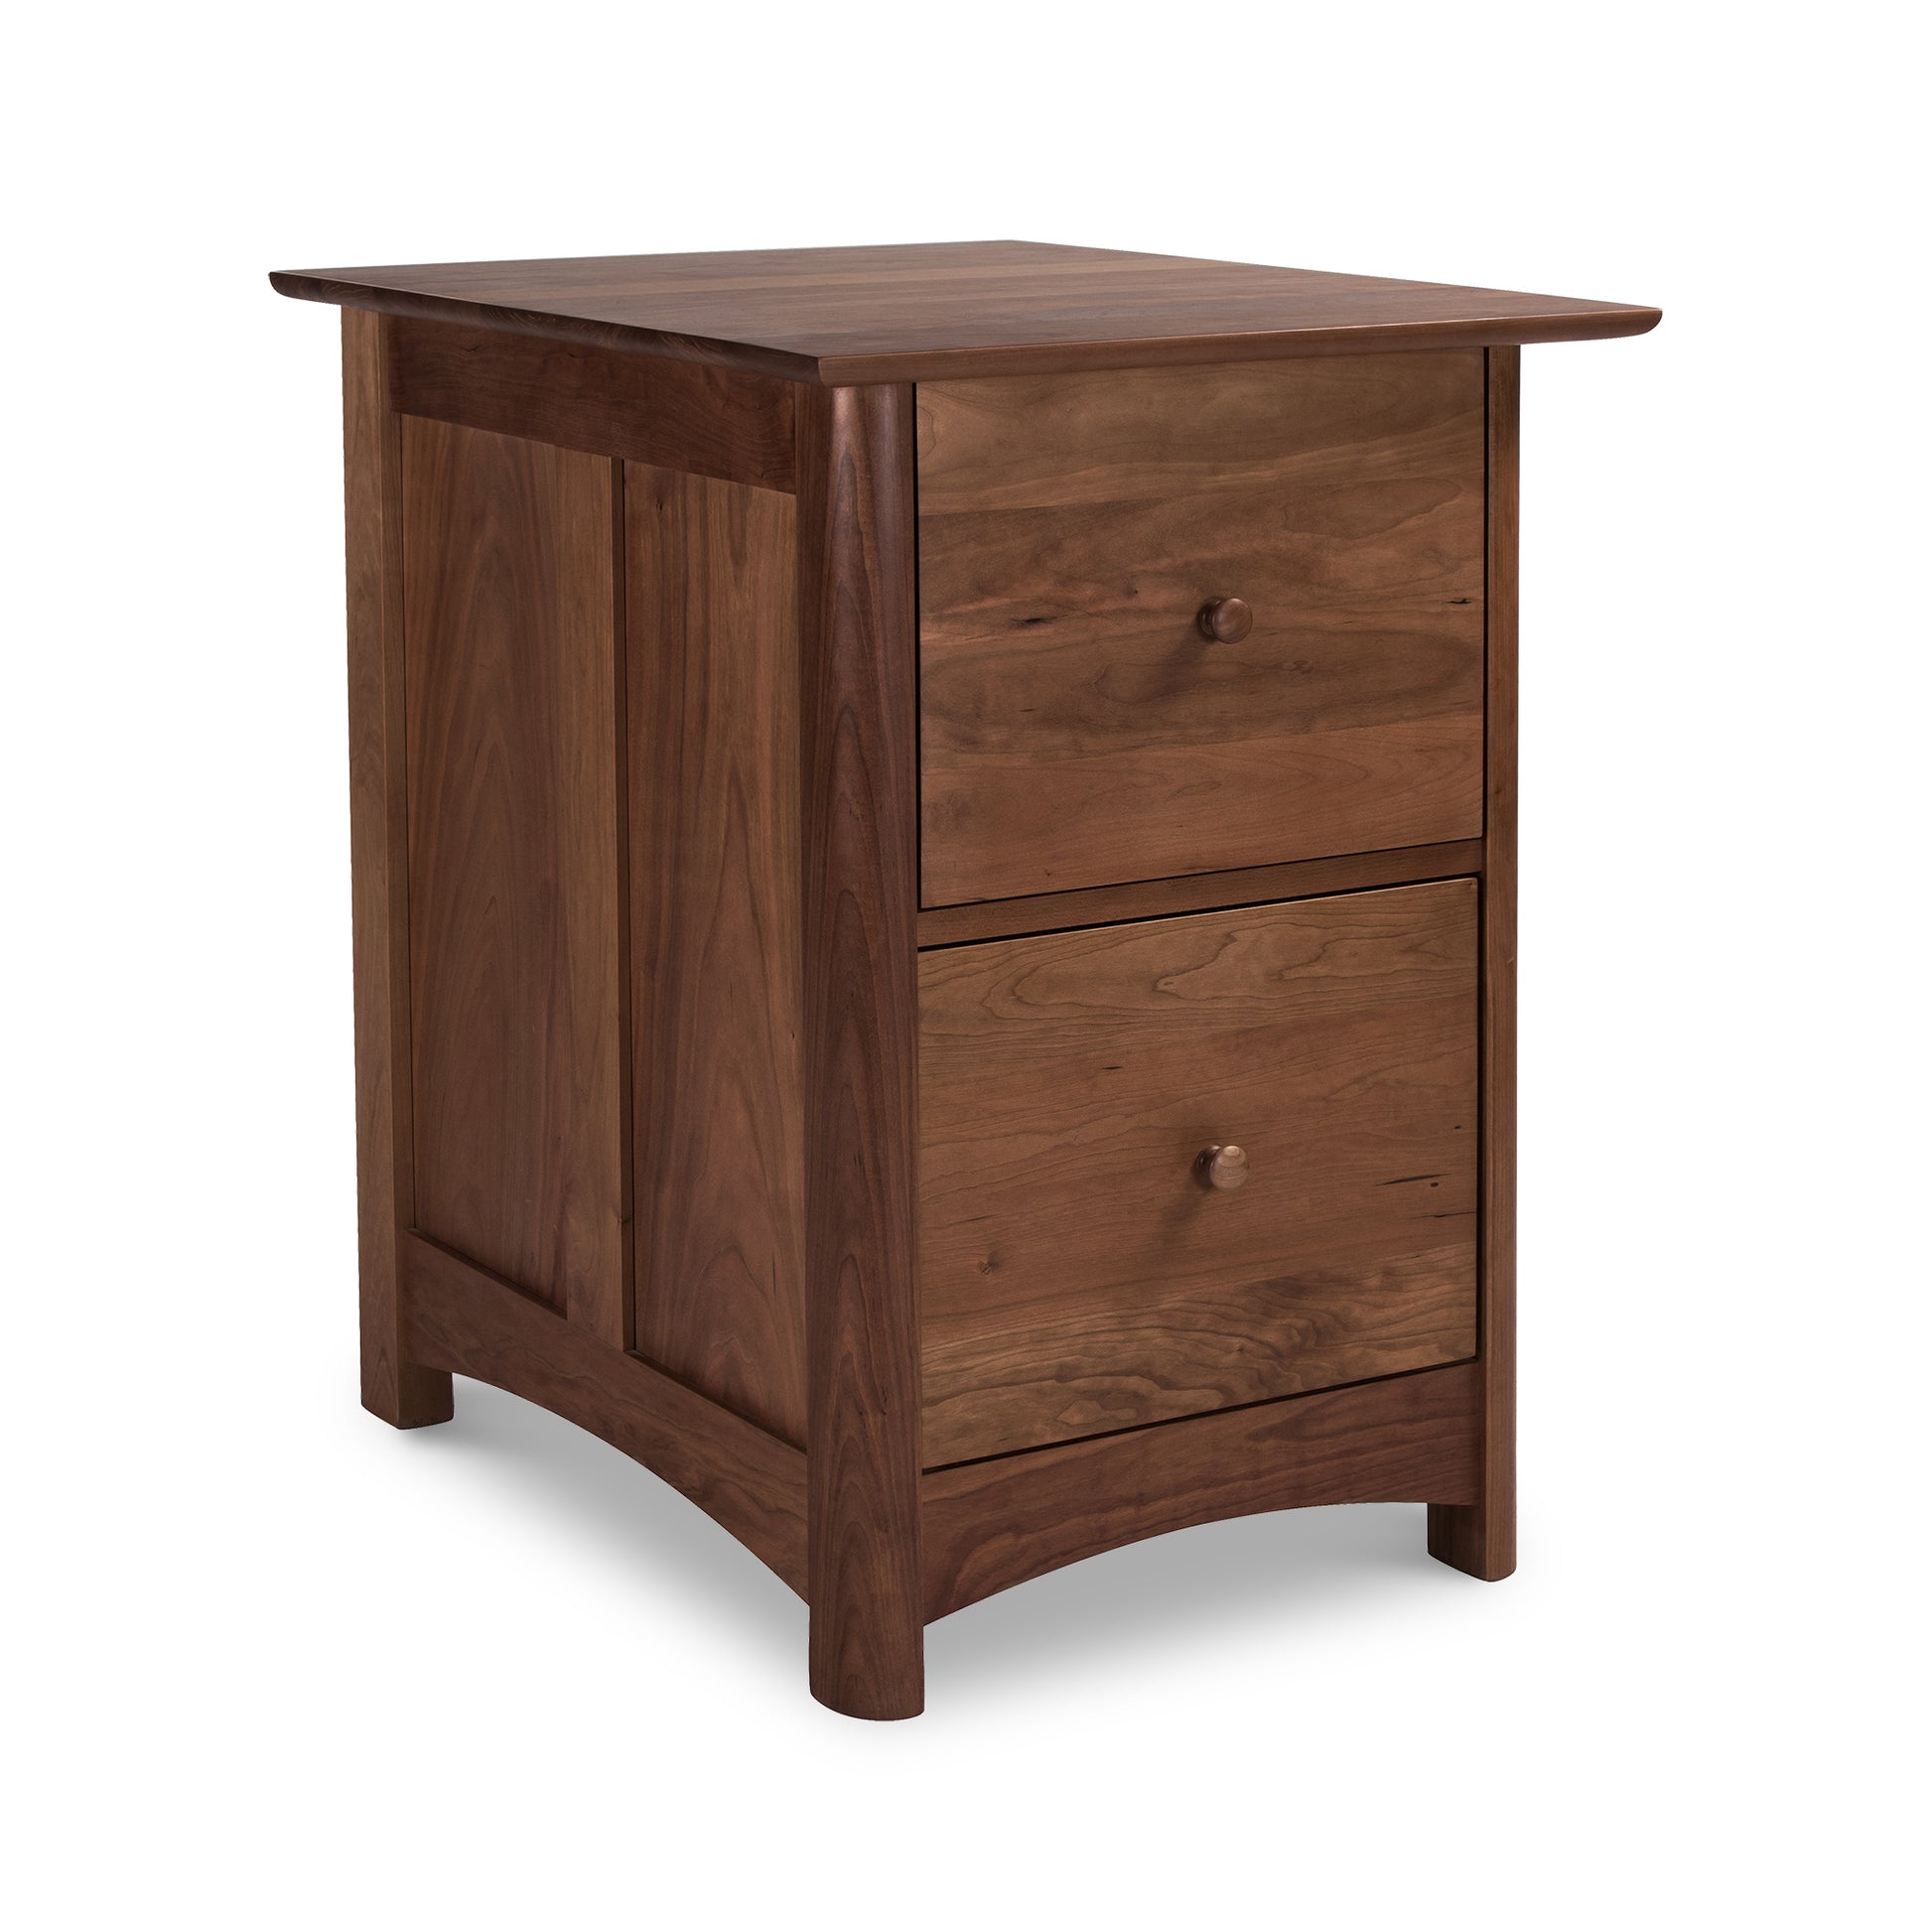 A Vermont Furniture Designs Heartwood Shaker Style two-drawer nightstand isolated on a white background.